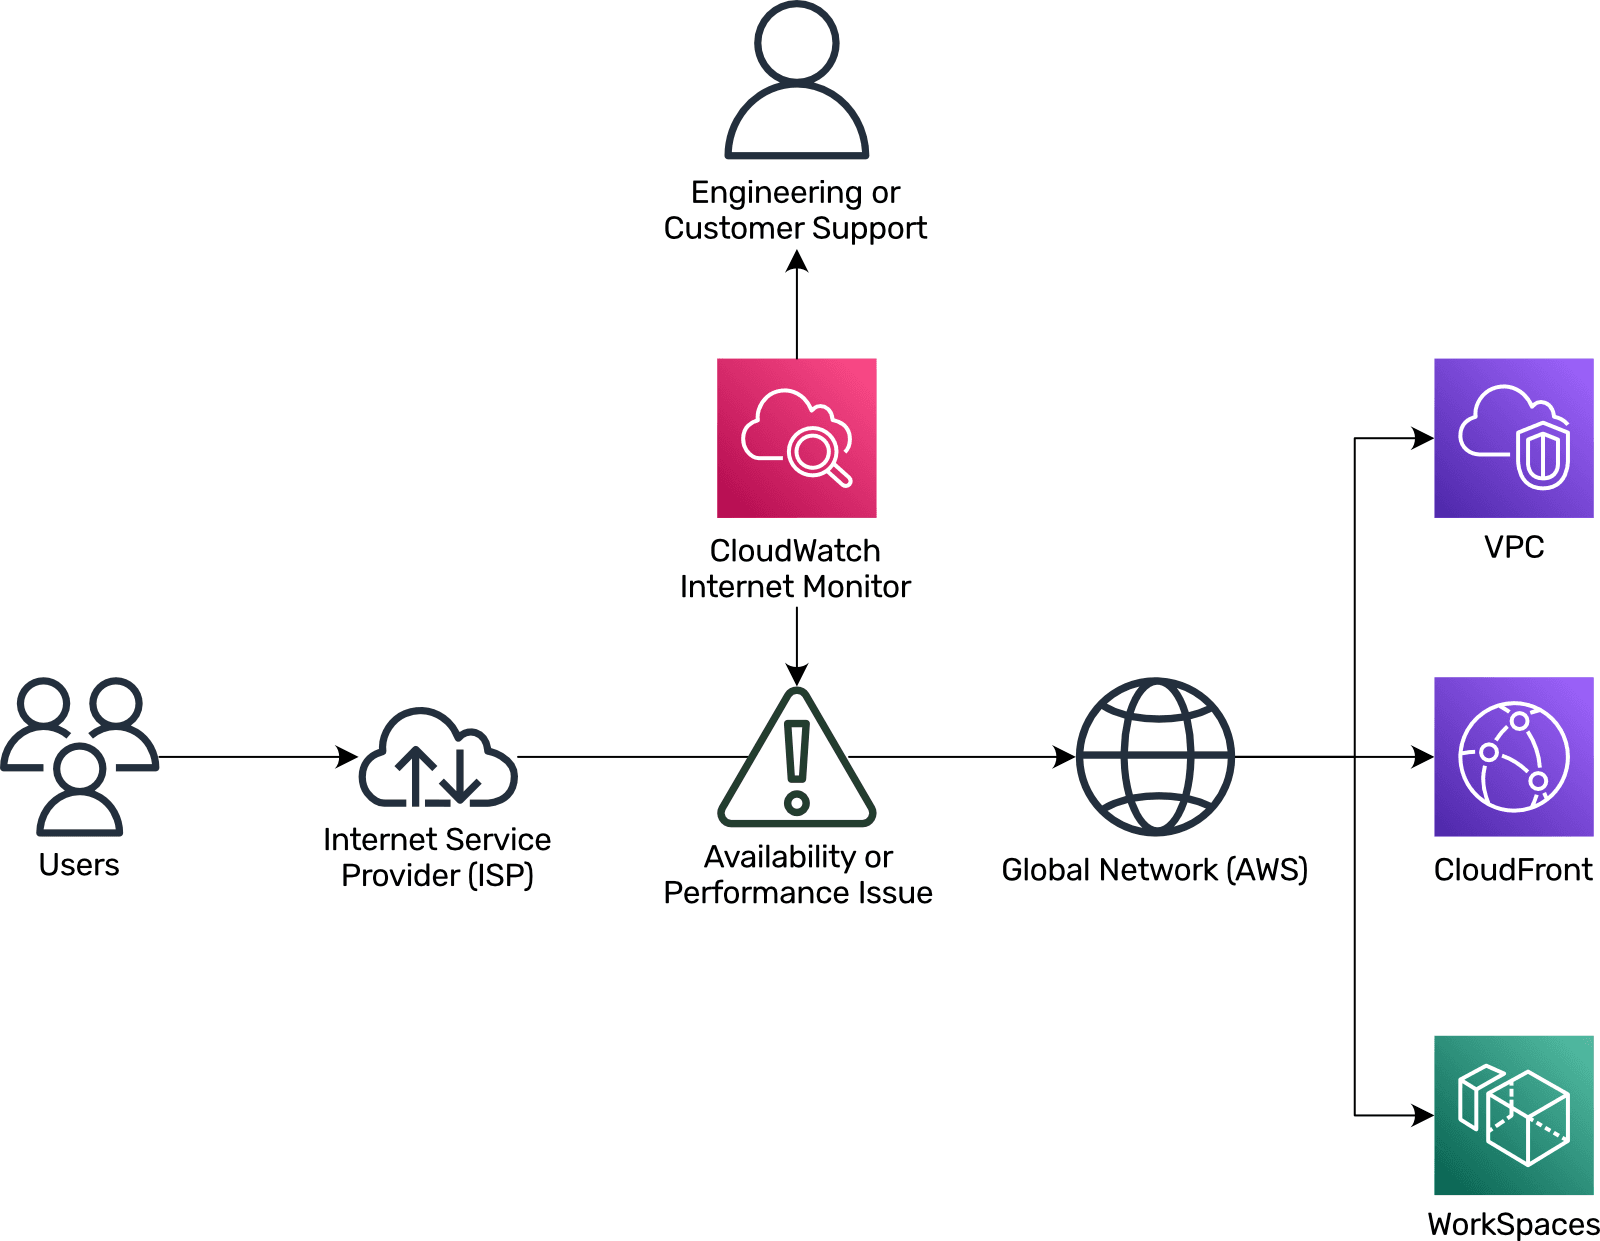 How does CloudWatch Internet Monitor work?